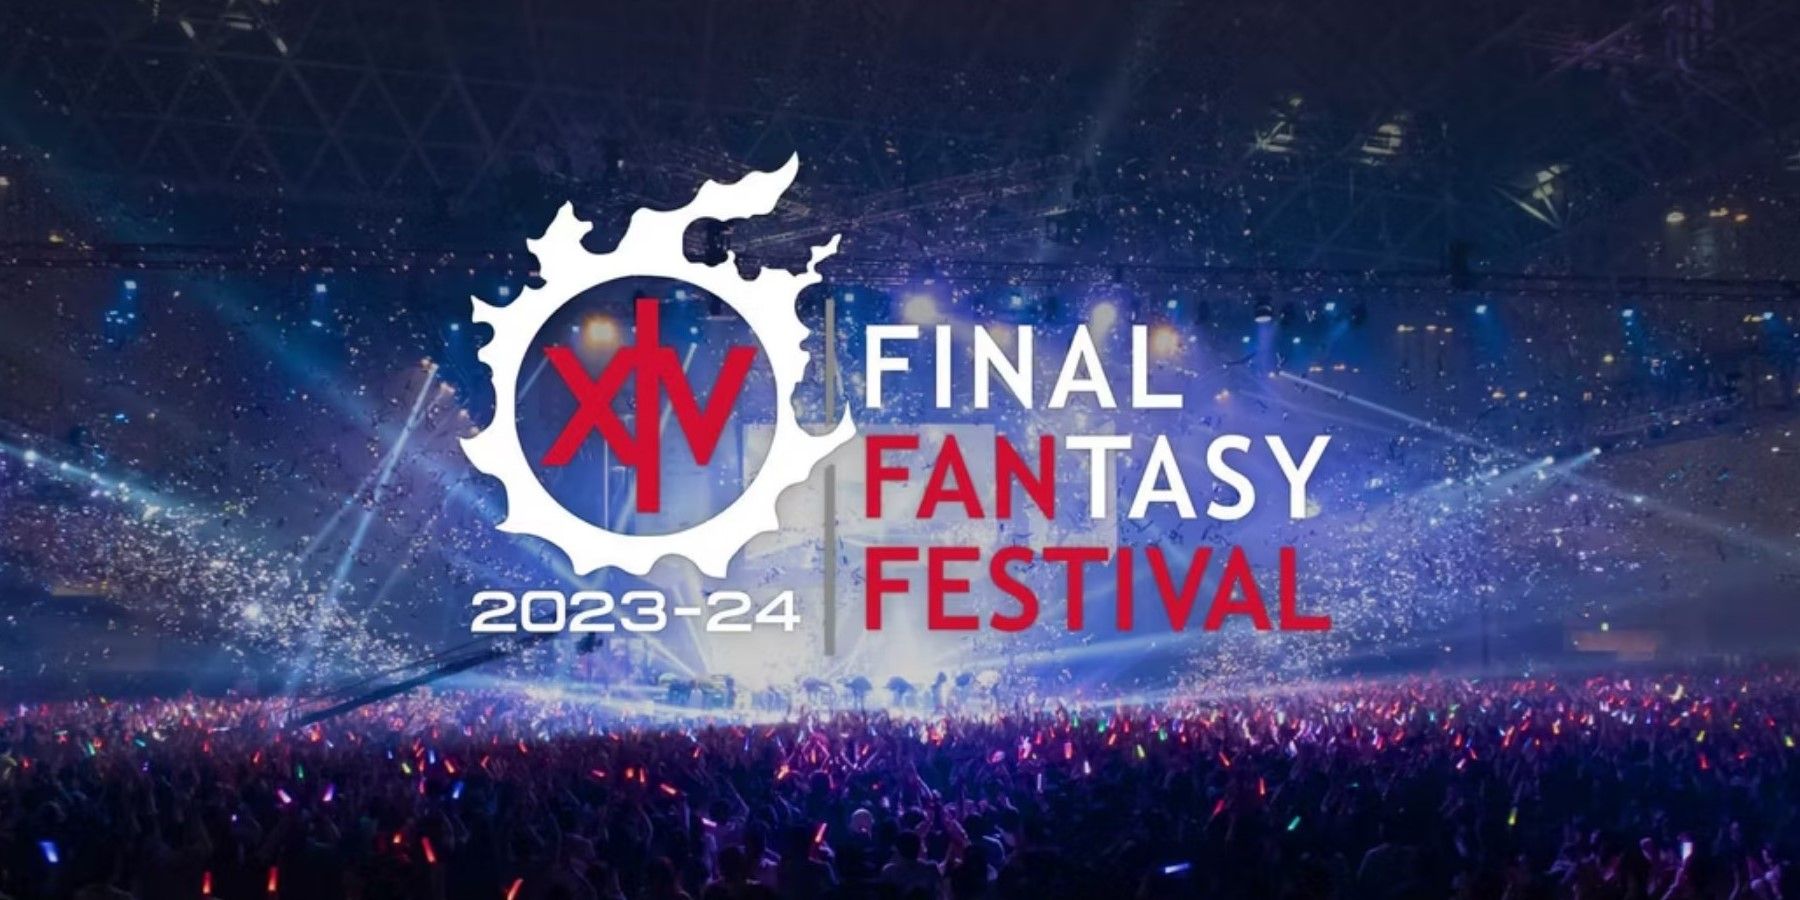 What You Need to Know About Final Fantasy 14's 2023 Fan Fest